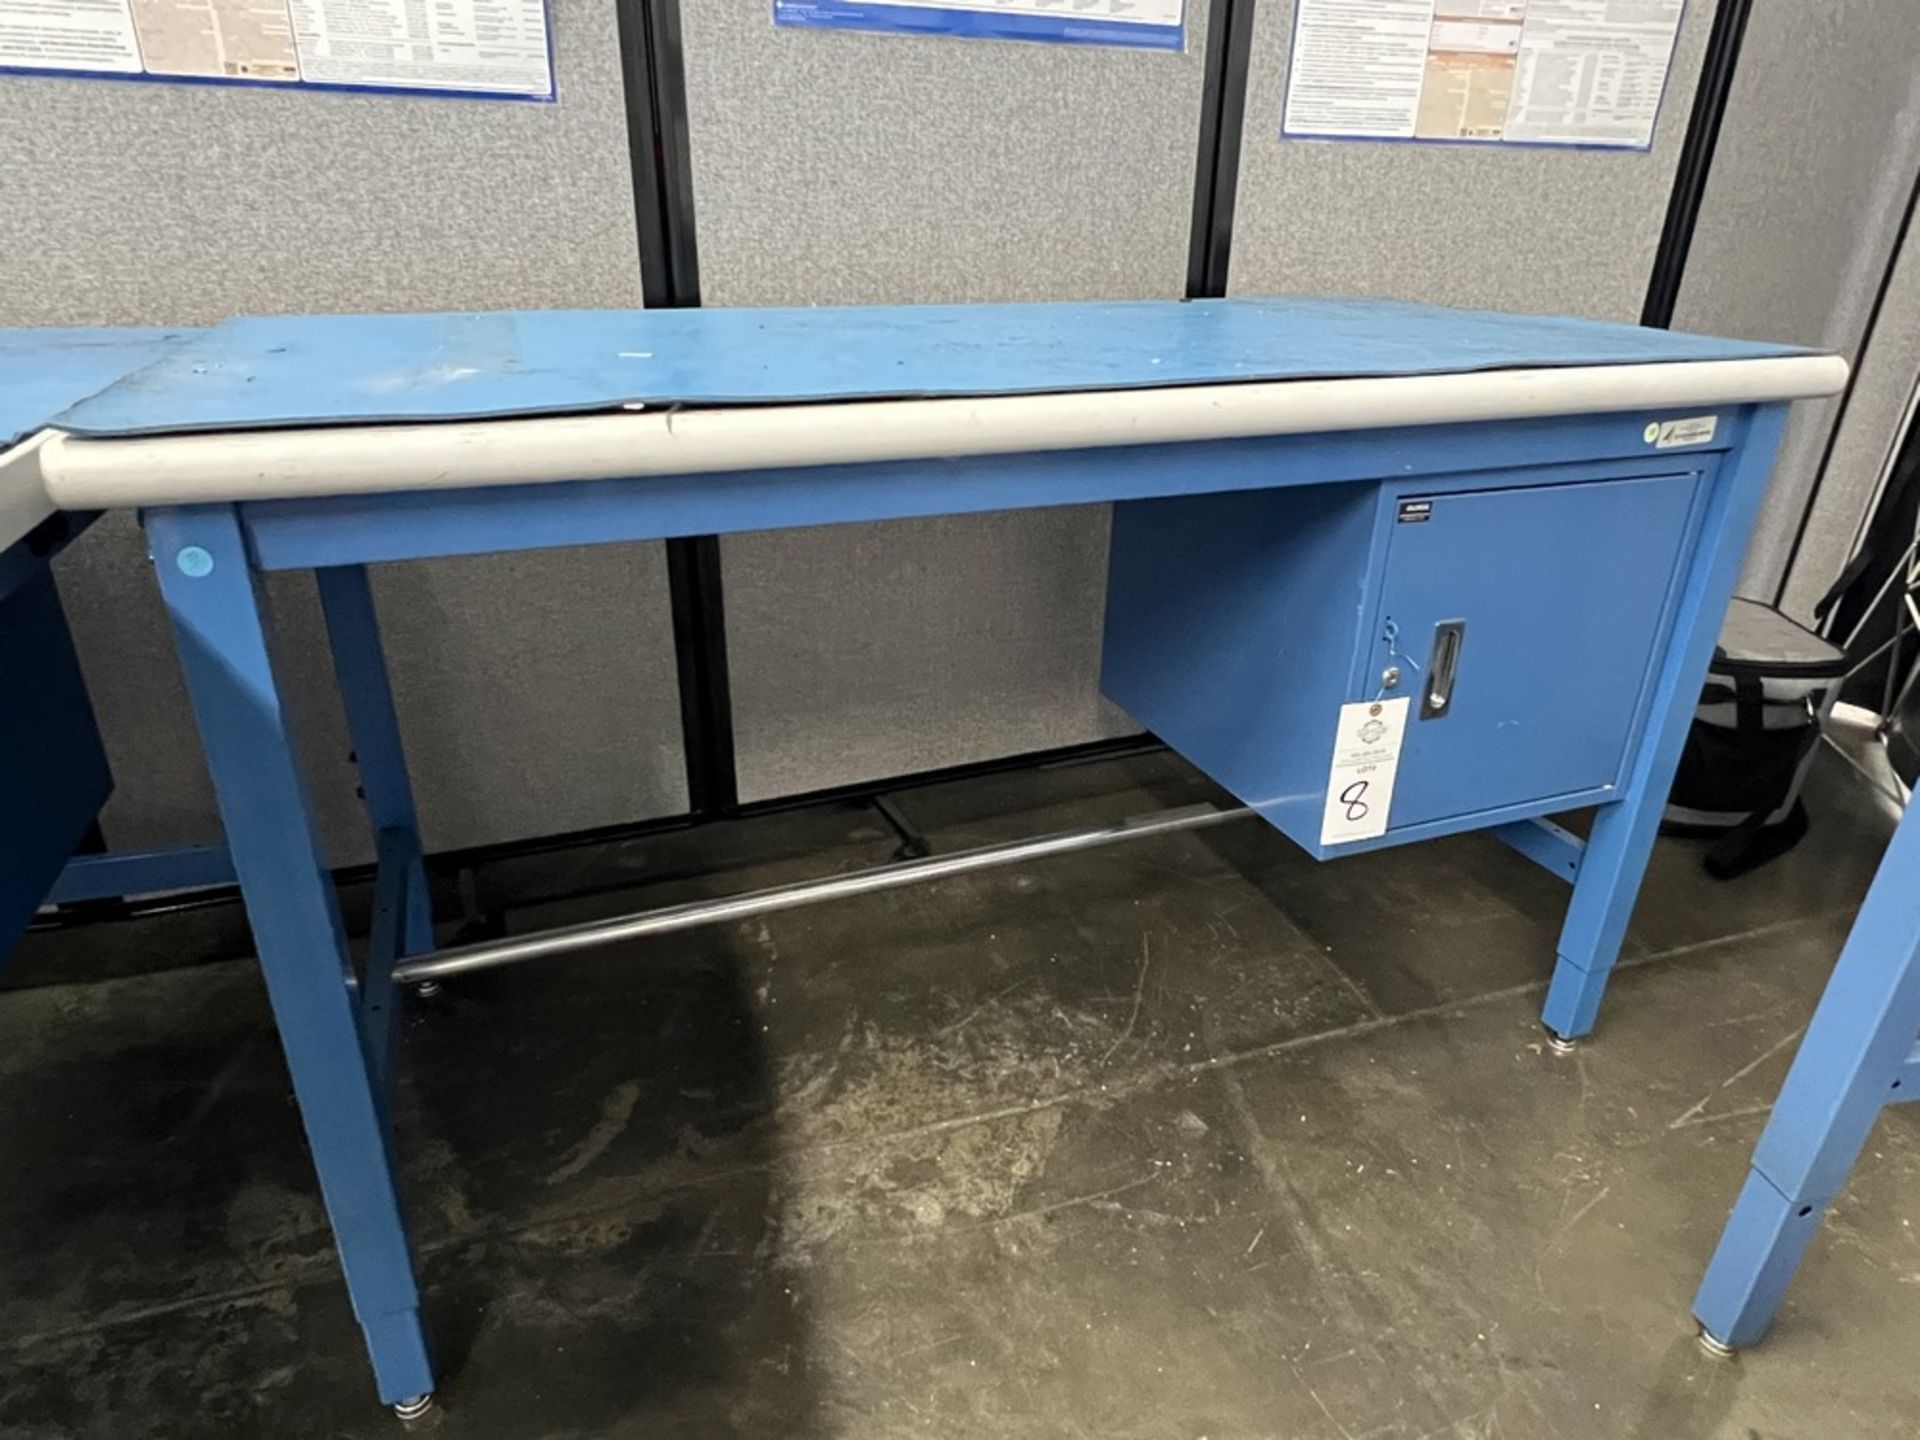 Heavy Duty Global Industrial Work Table With Cabinet and Power Supply 5' x 30" x 36"